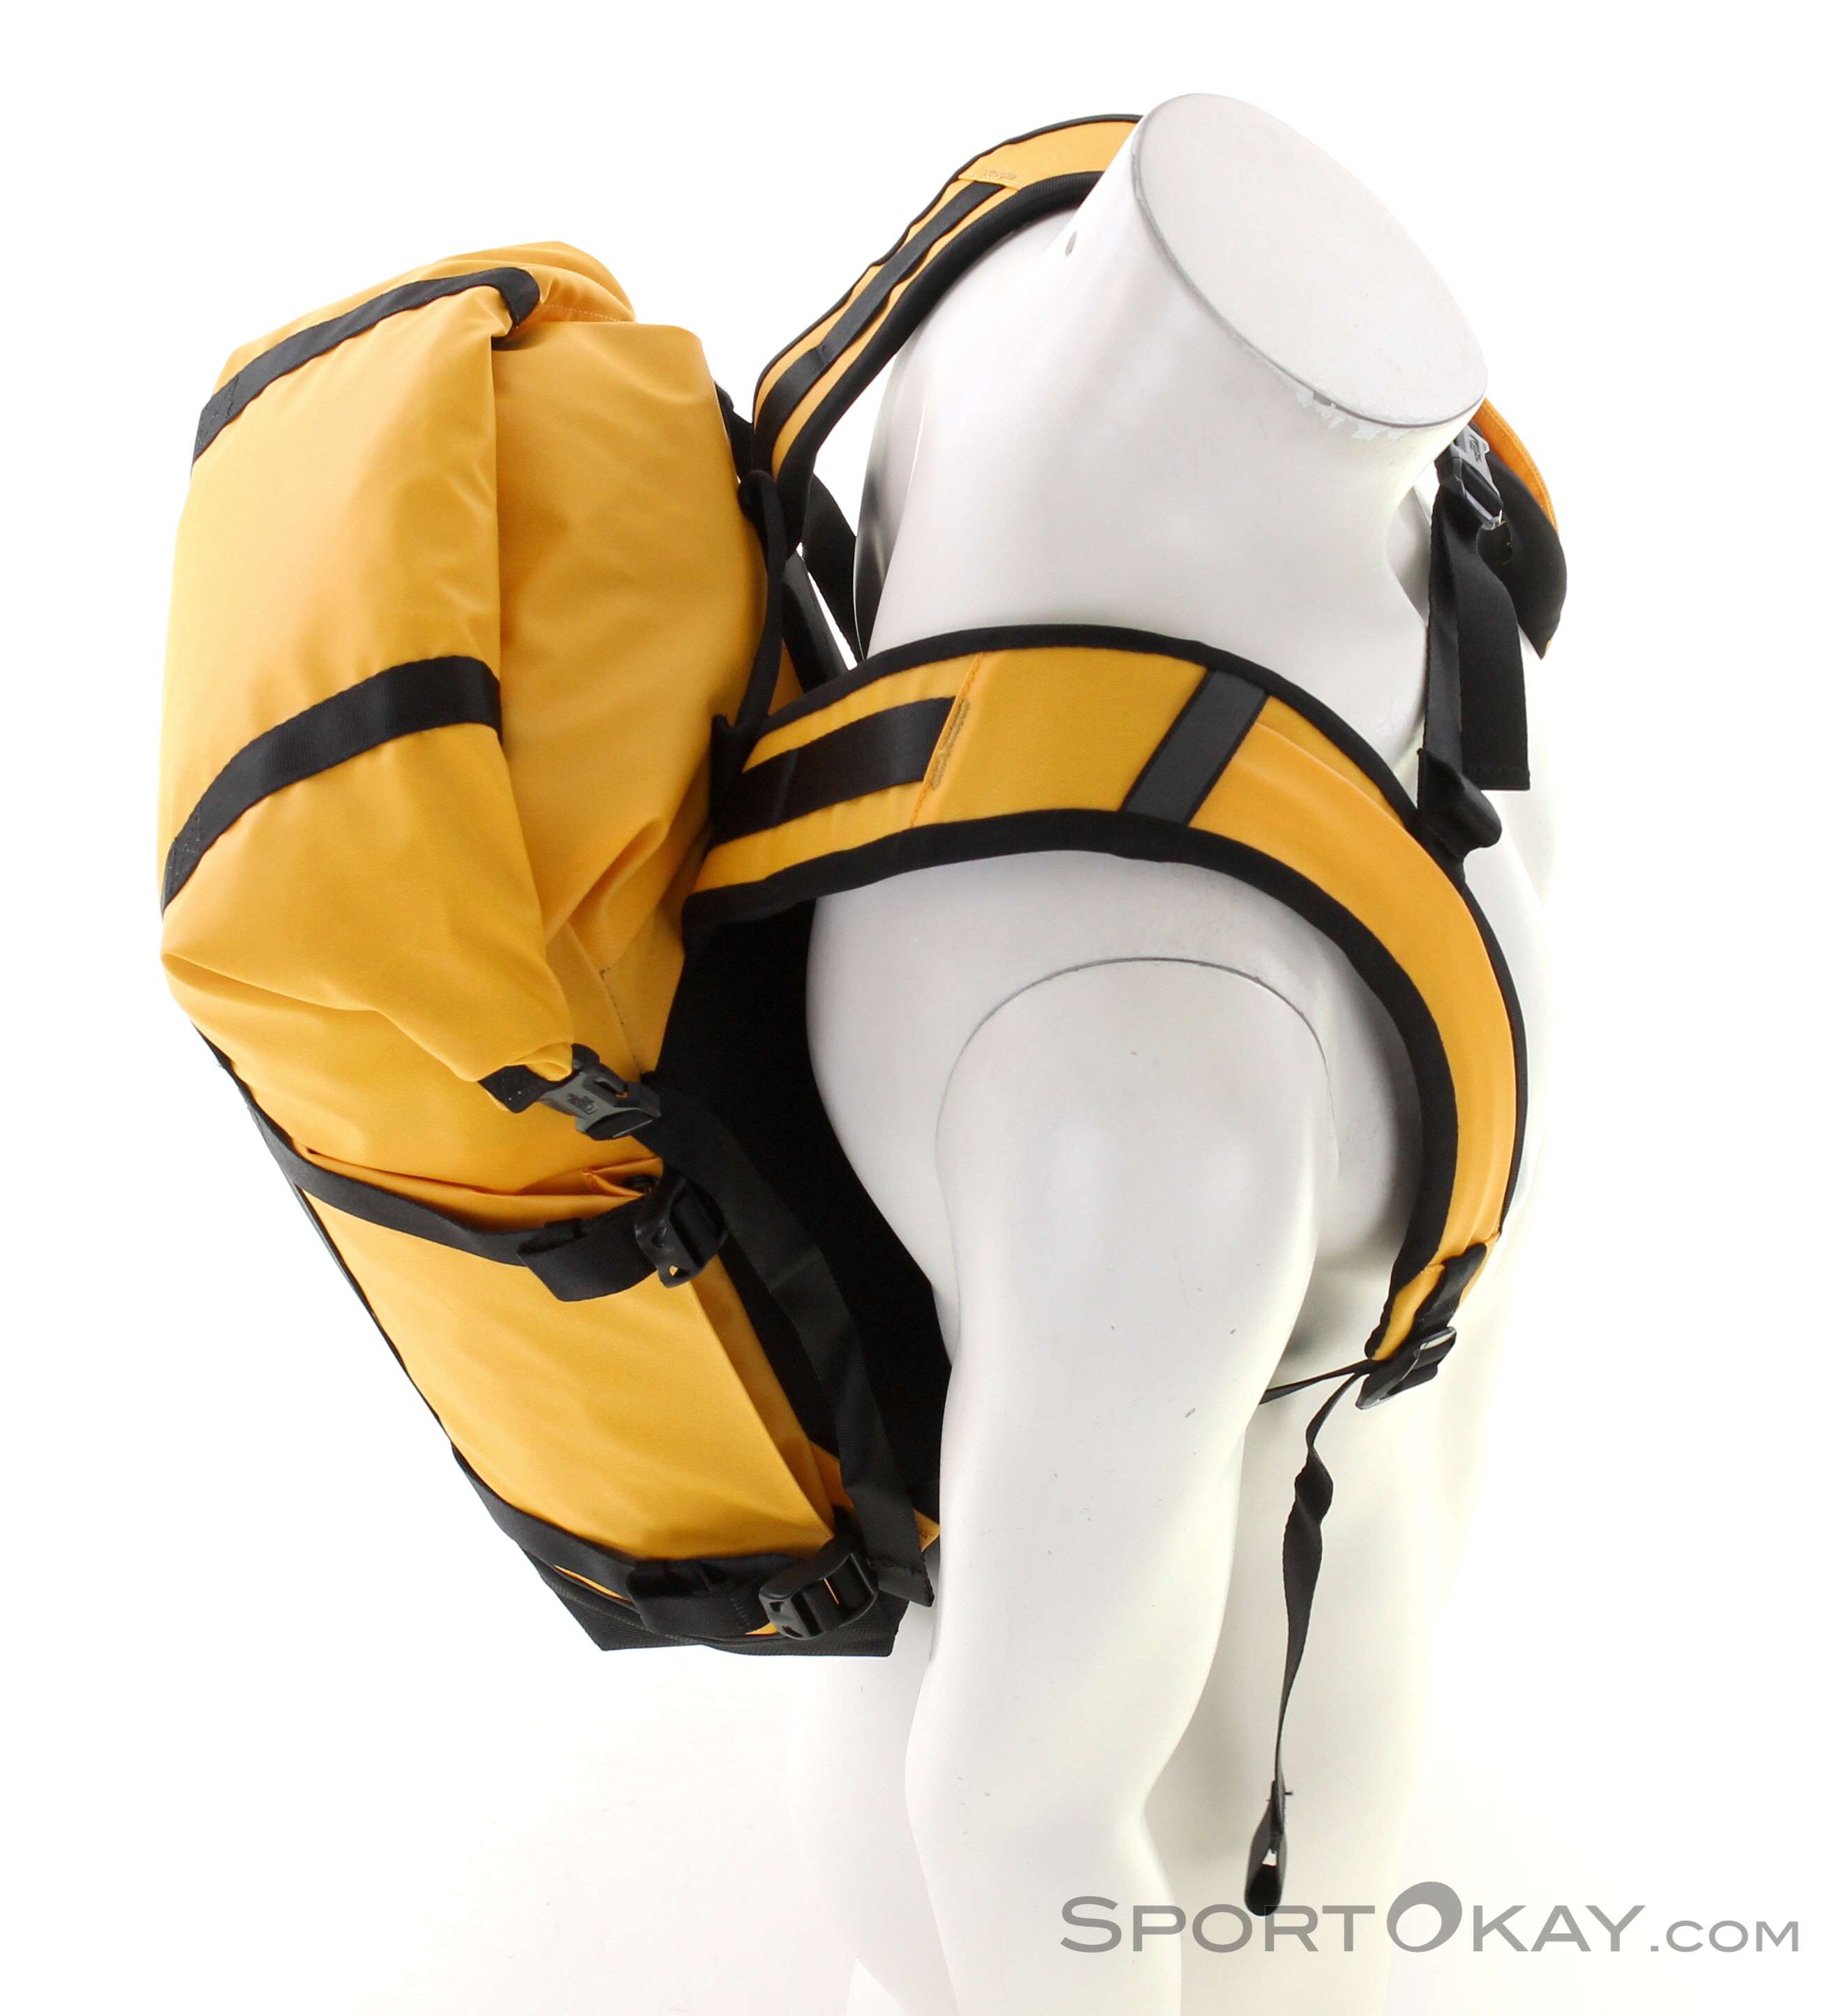 The North Face Sac À Dos Commuter Pack Roll Top 23L